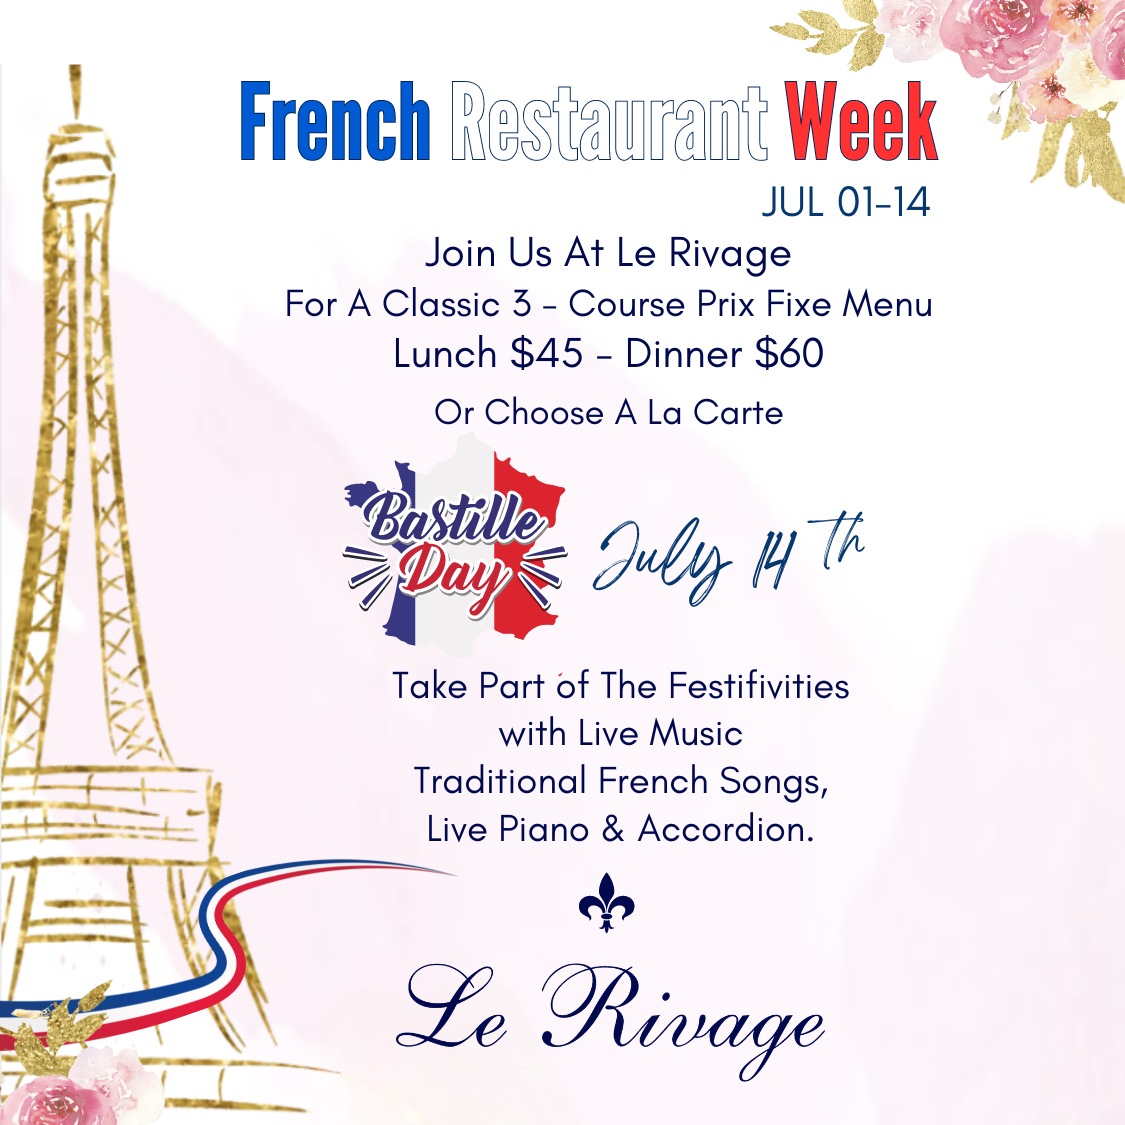 French Restaurant Week at Le Rivage from July 1st to 14th. Join us for a classic 3 course prix fixe menu: Lunch $45 and Dinner $60. Take Part of The Festifivities with Live Music Traditional French Songs, Live Piano & Accordion.